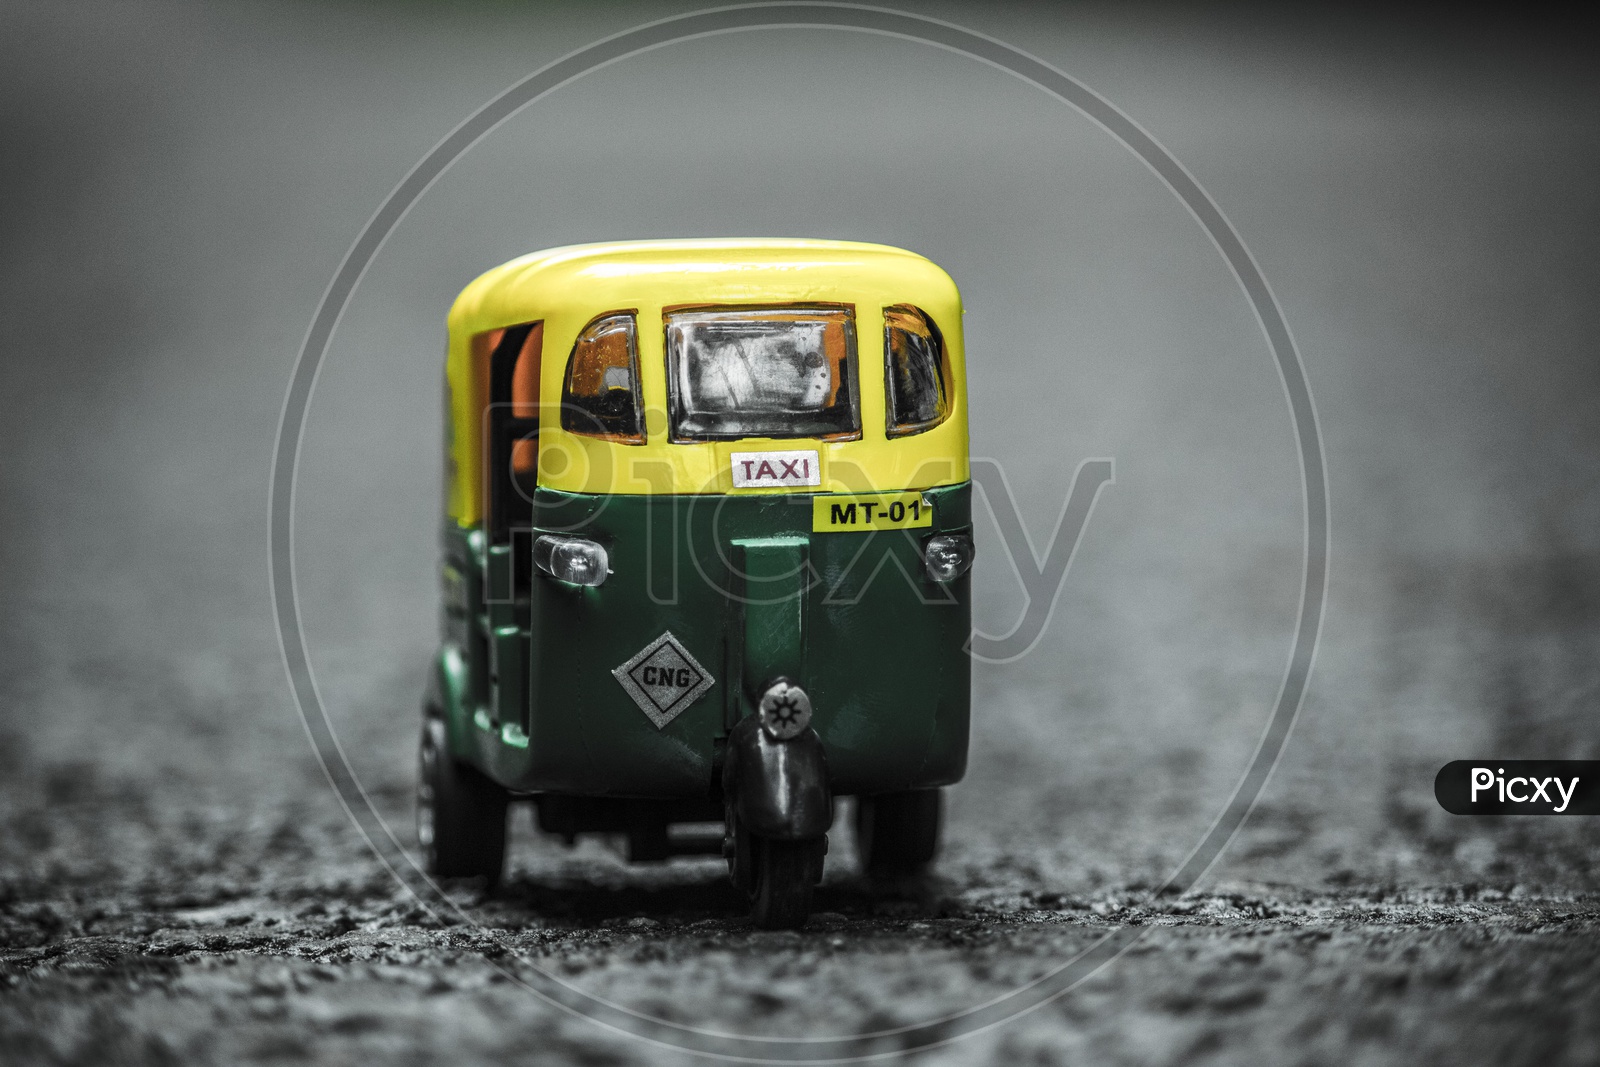 The toy taxi auto